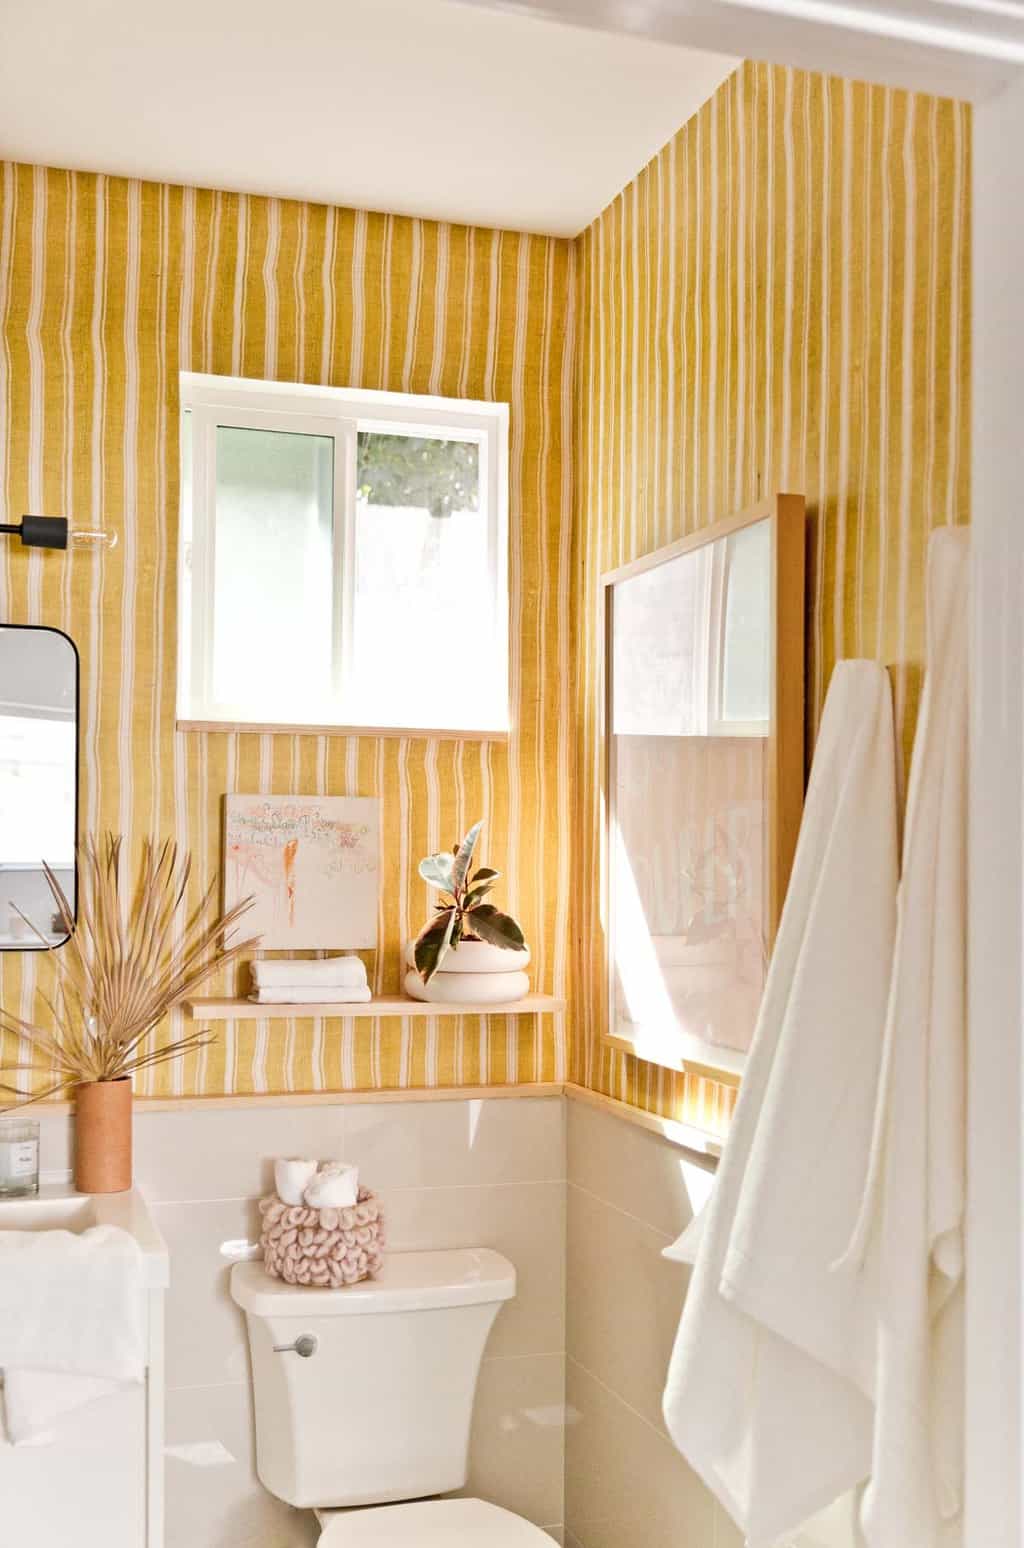 Yellow makes the space look cheerful. Source: Paper and Snitch